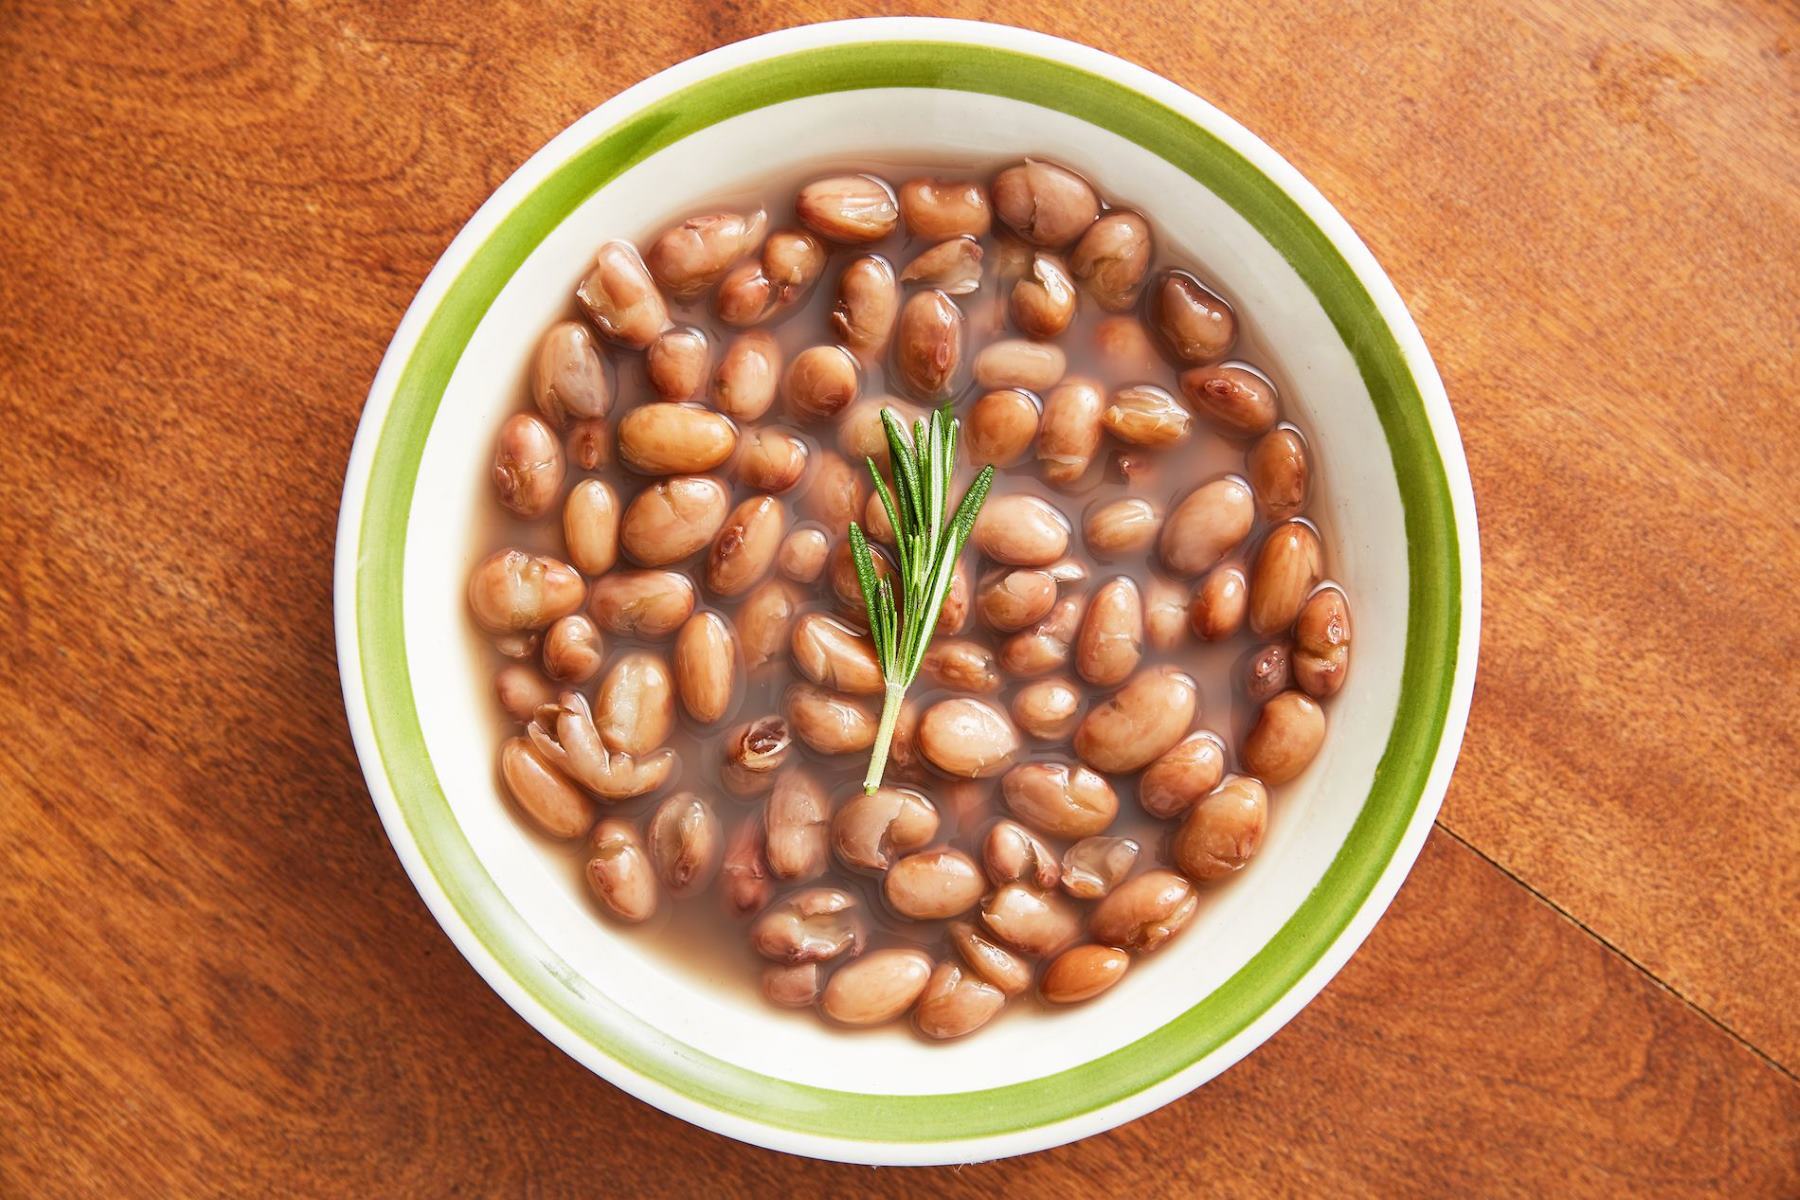 How To Store Cooked Beans